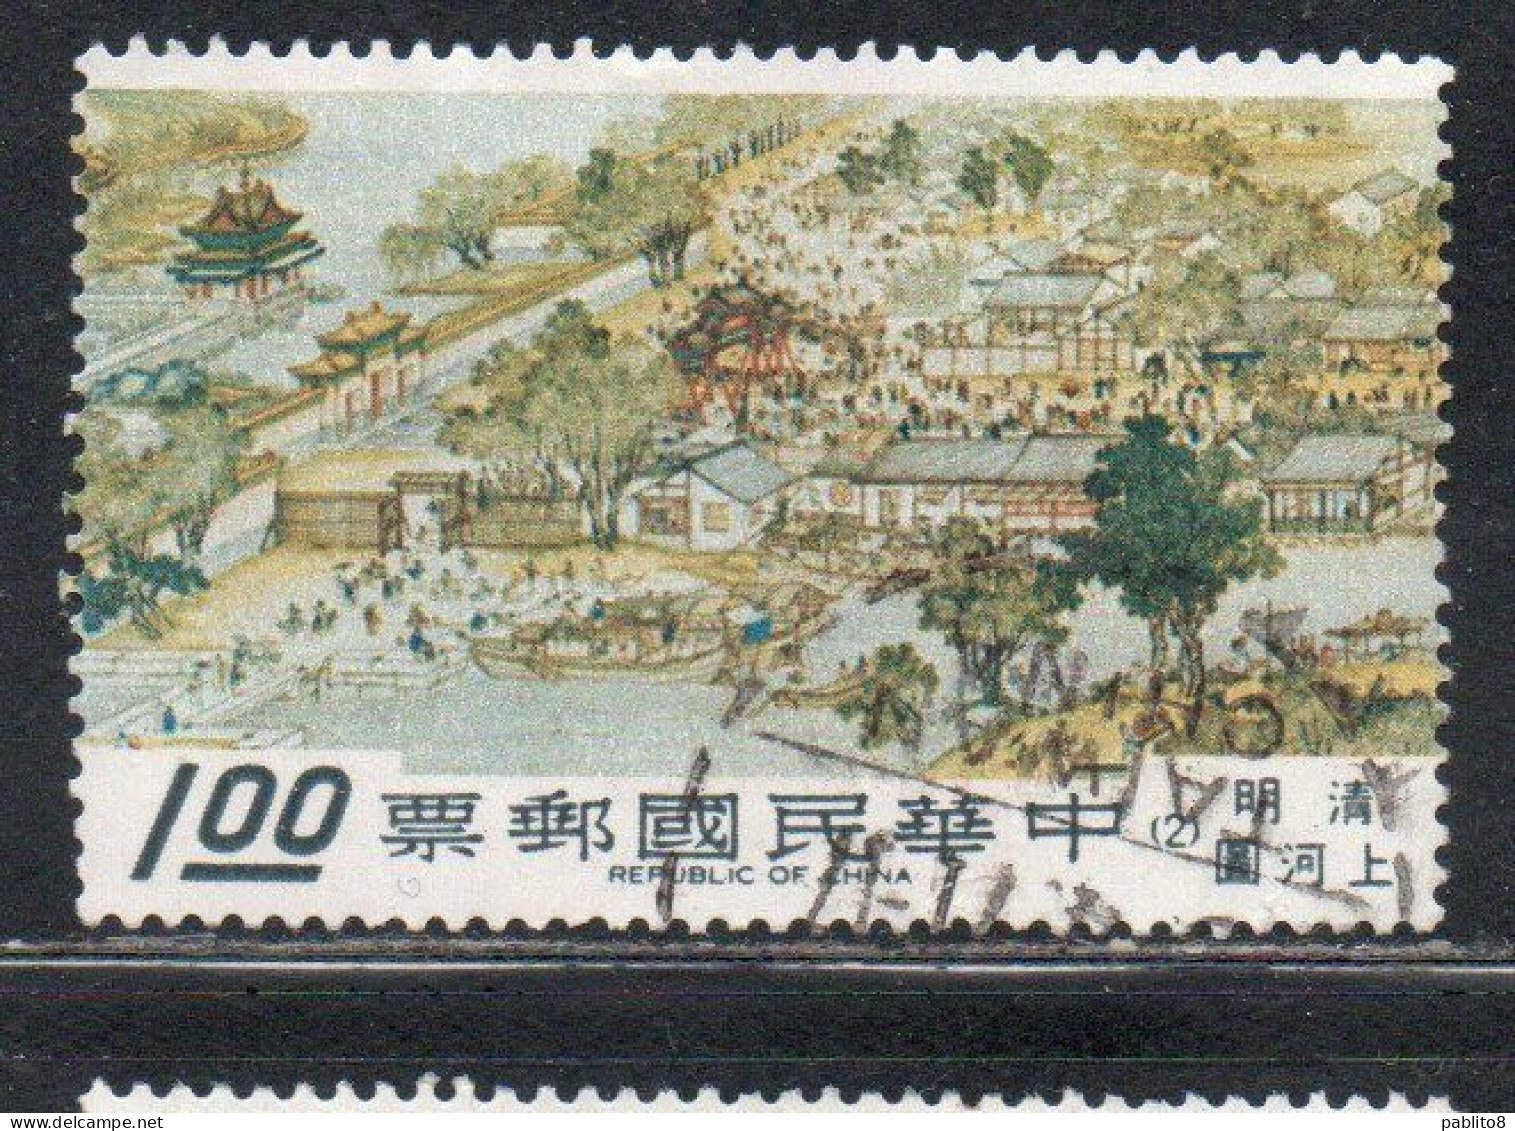 CHINA REPUBLIC CINA TAIWAN FORMOSA 1972 SCROLLS DEPICTING EMPEROR SHIH-TSUNG'S 1$ USED USATO OBLITERE' - Used Stamps